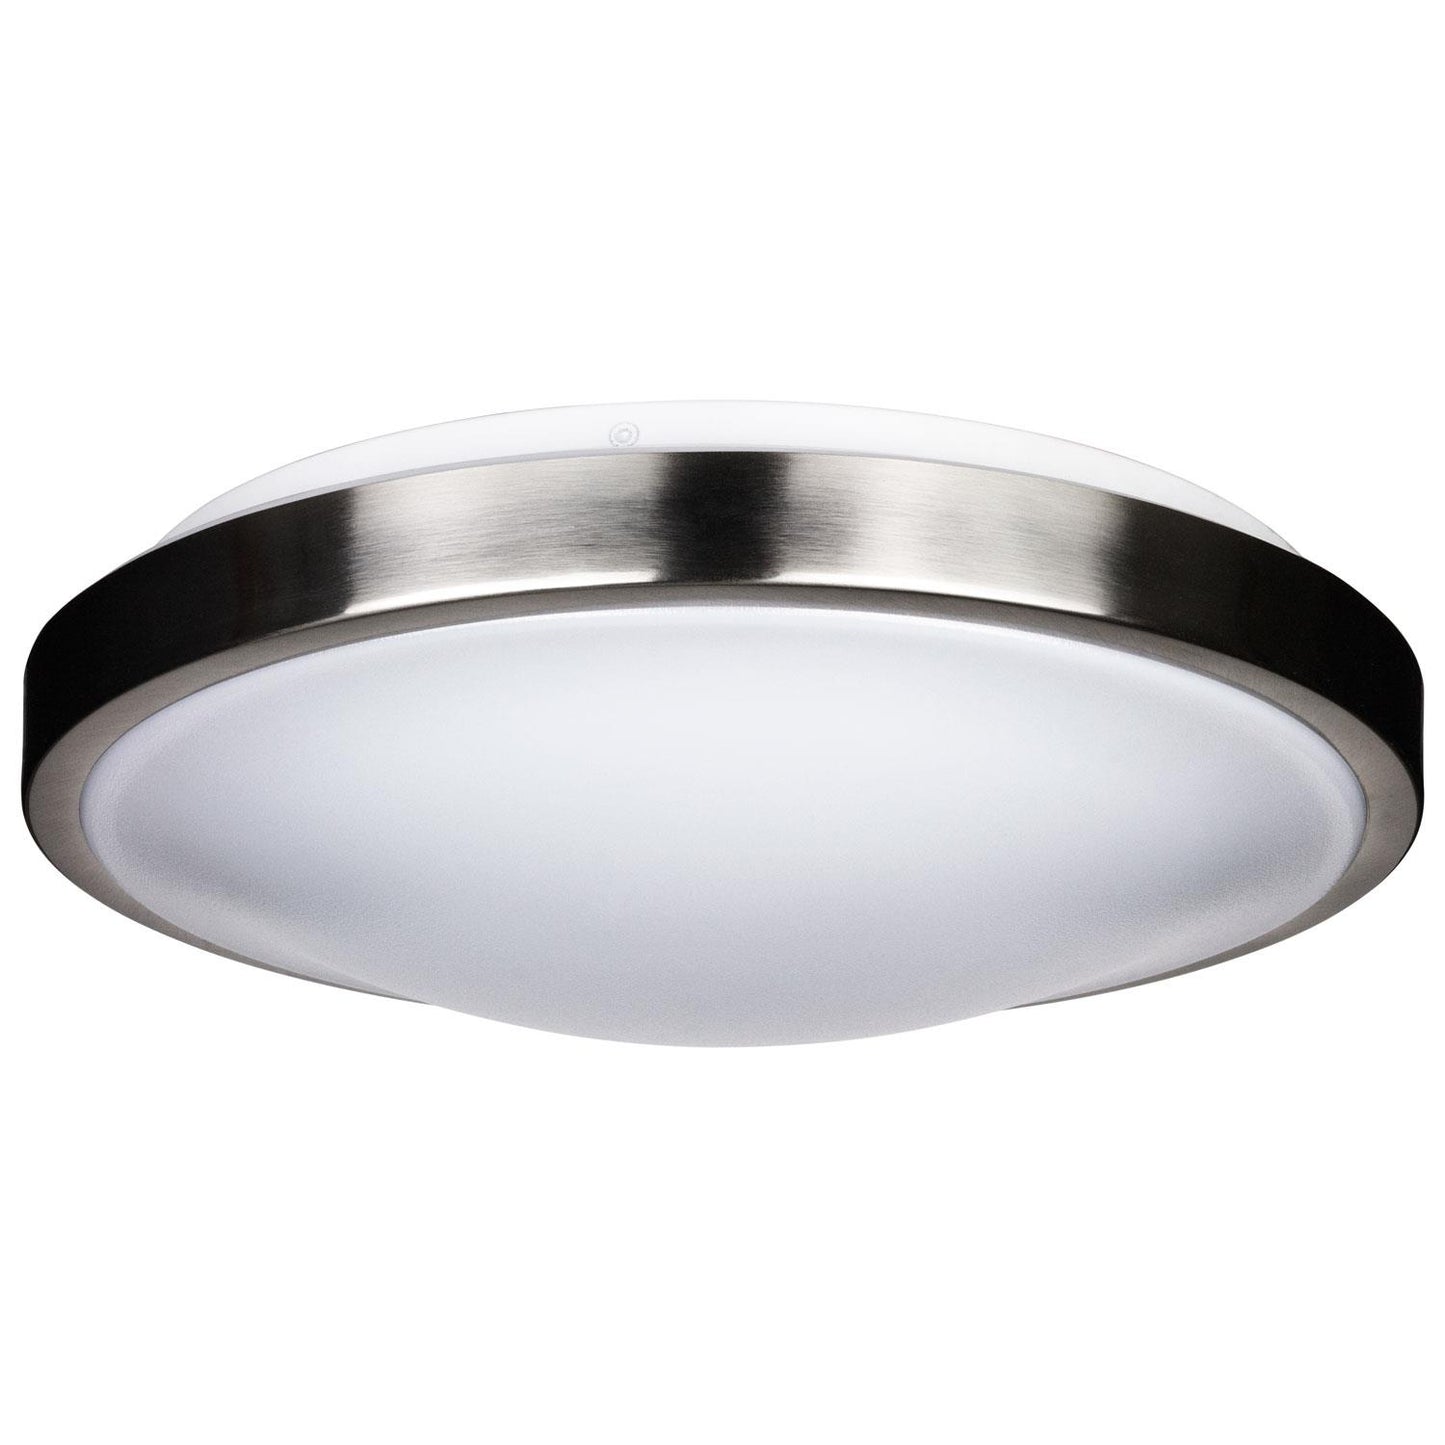 Sunlite 49151-SU LED Ceiling Light Fixture with Brushed Nickel Trim, 15 Watts, Dimmable, 12-Inch, 40K - Cool White